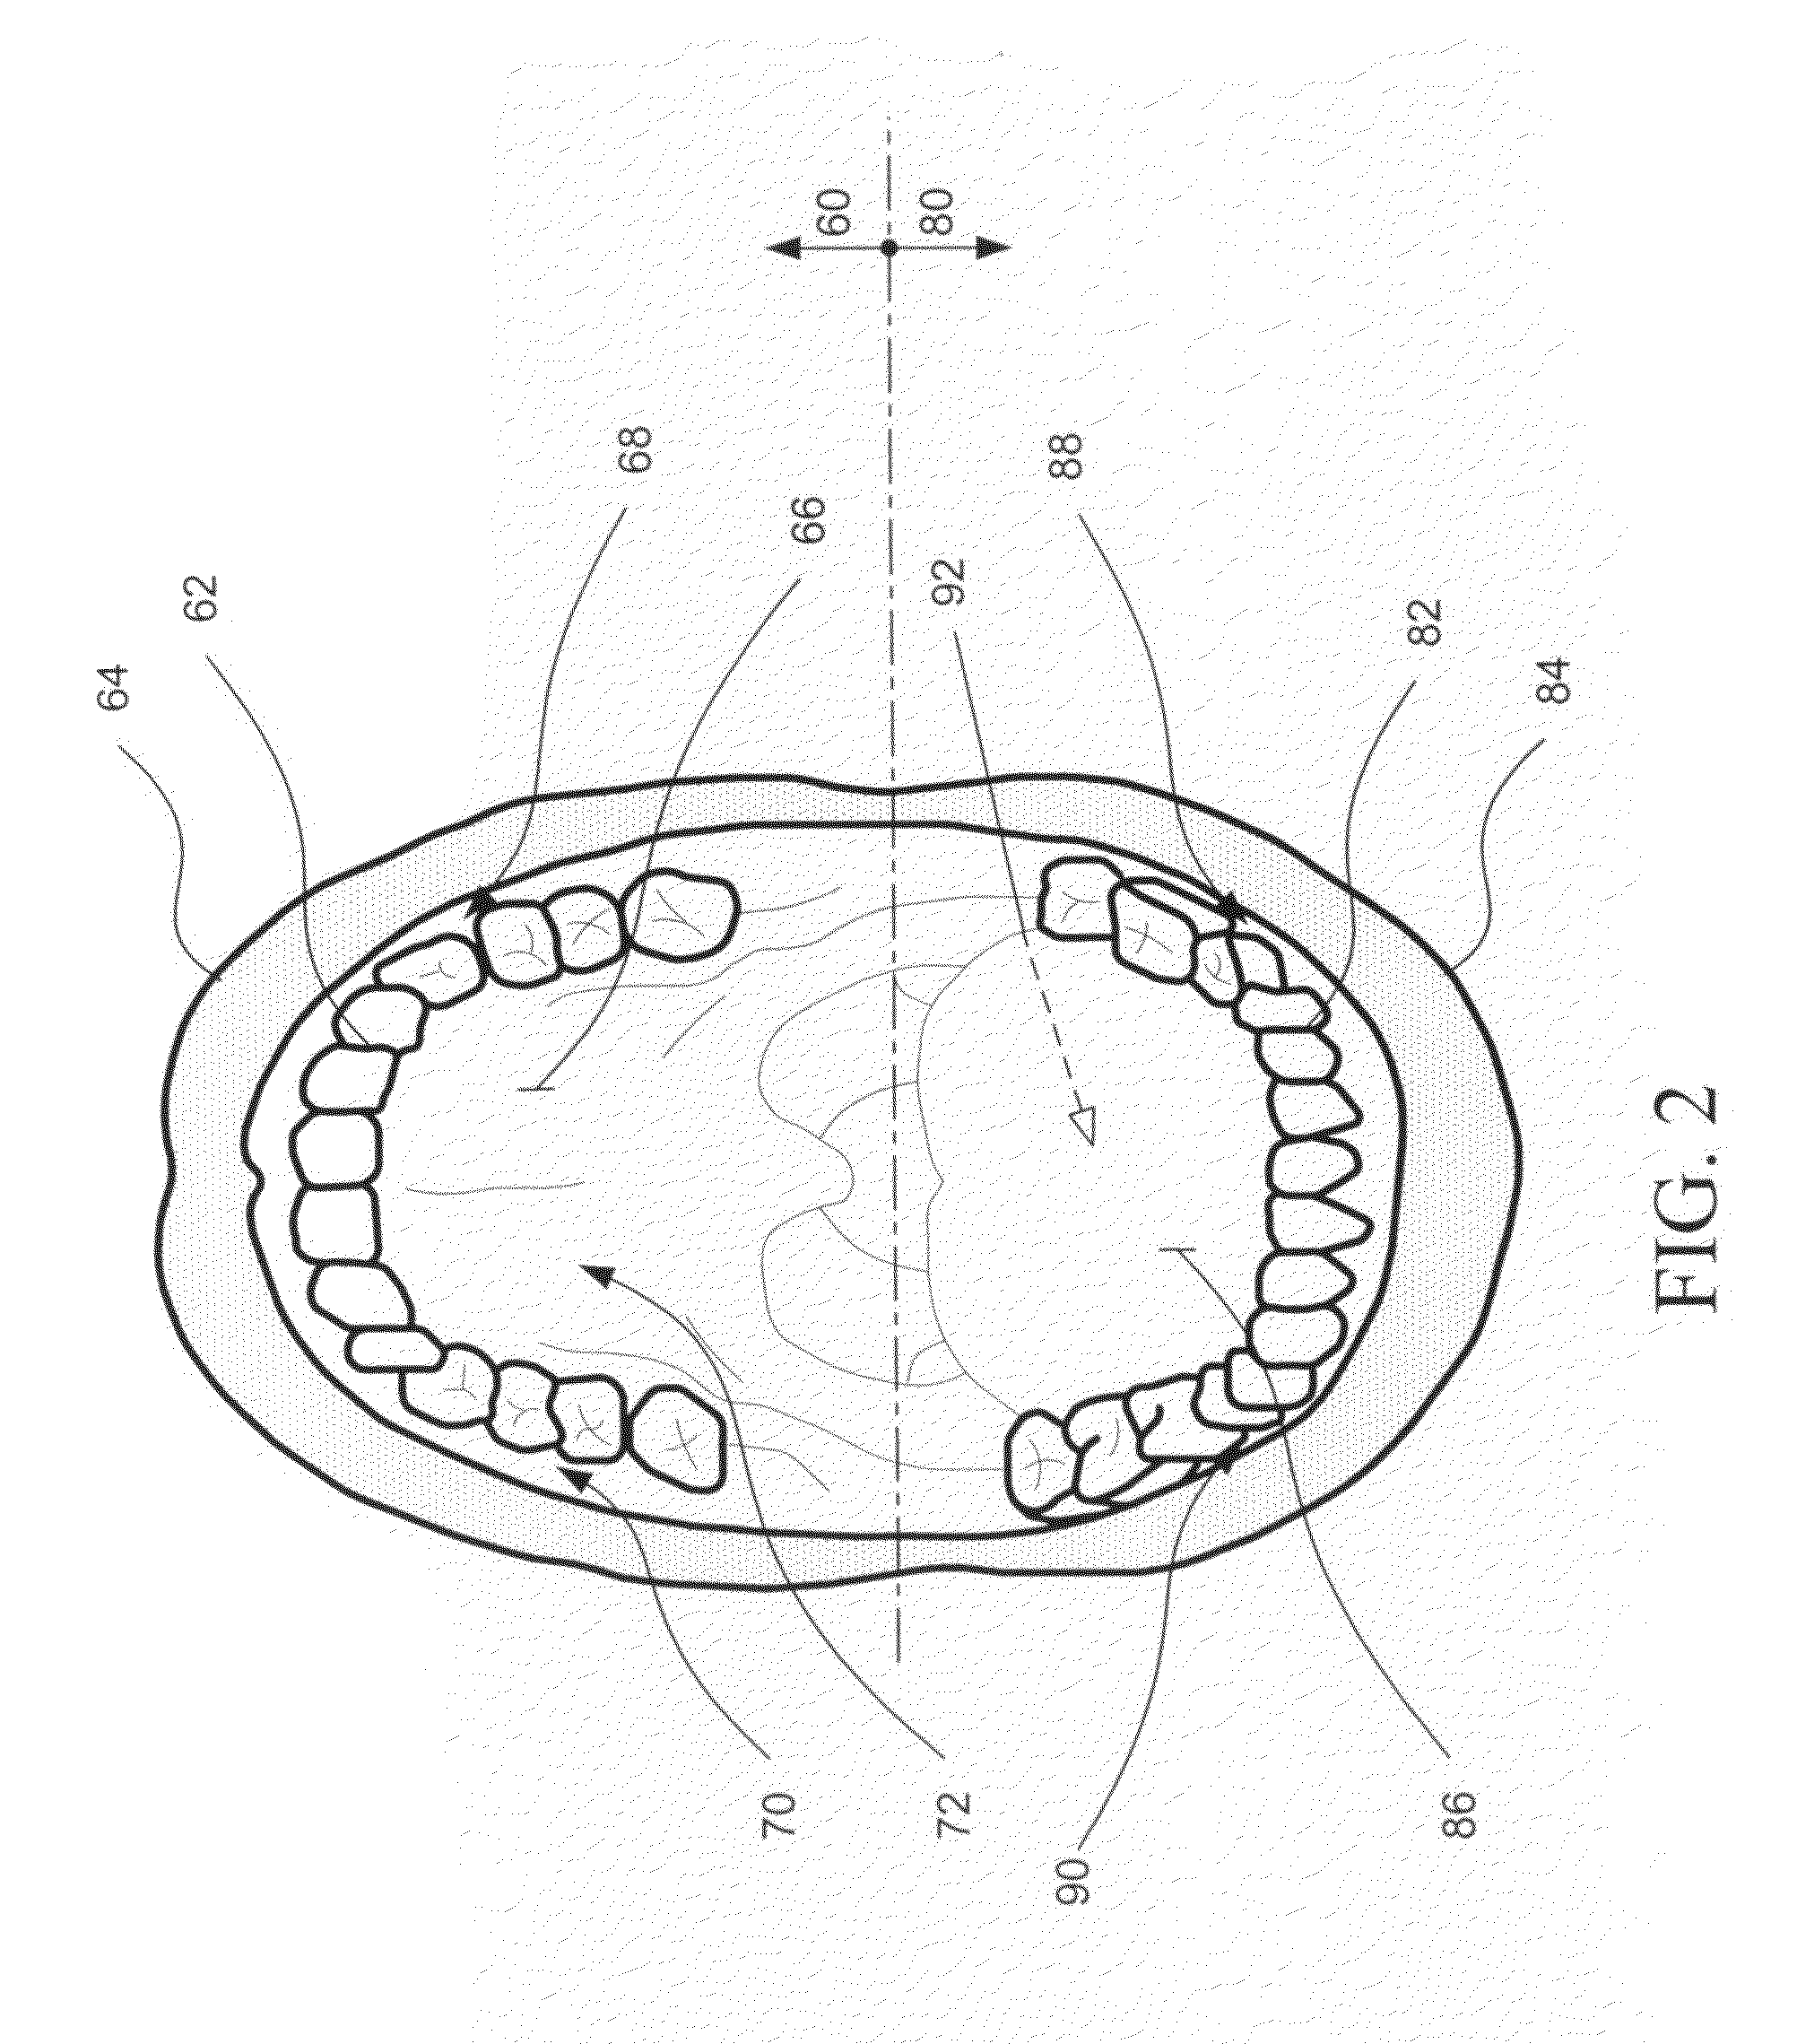 Intraoral behavior monitoring and aversion devices and methods